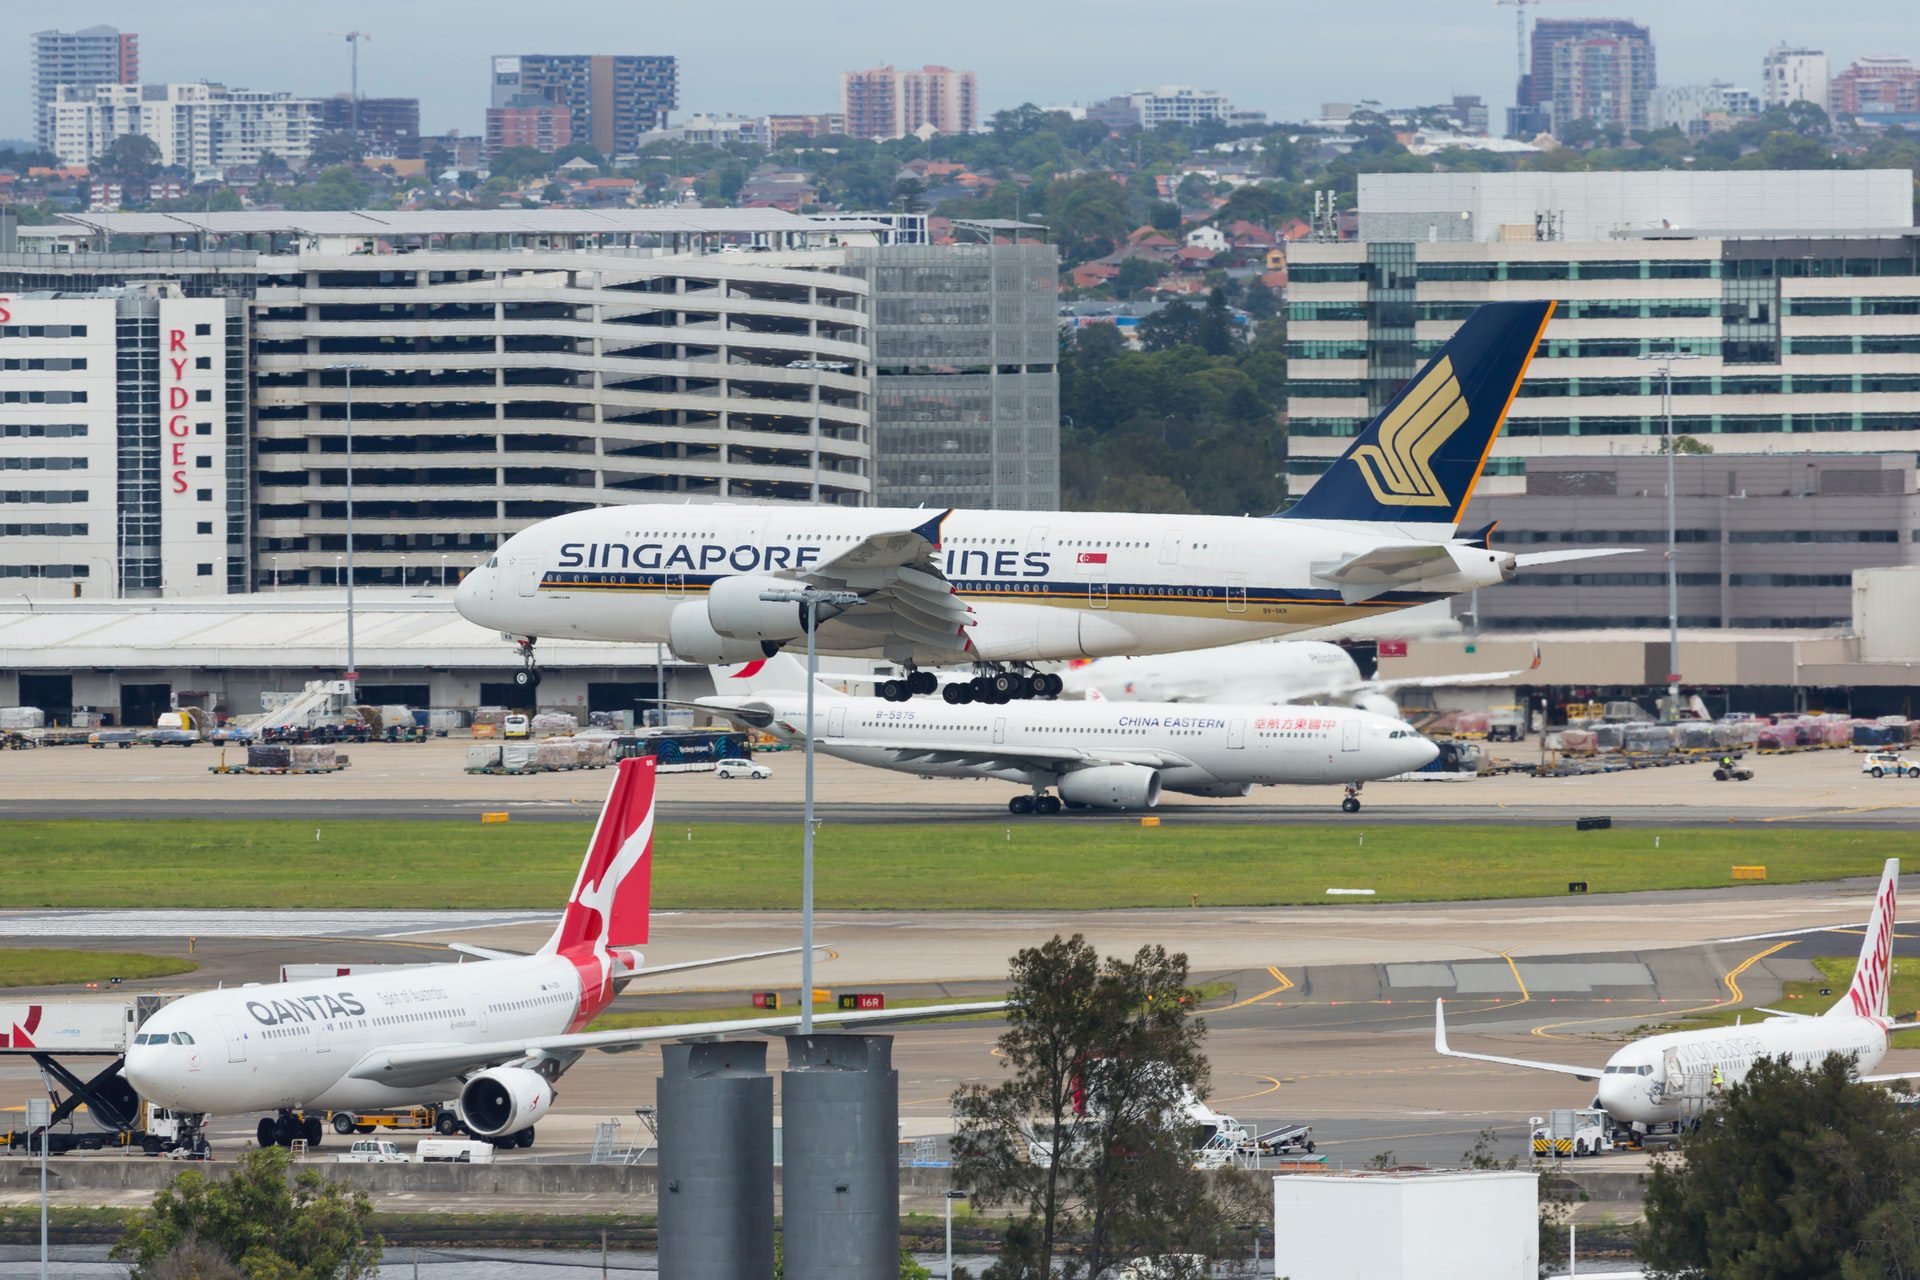 In May, Sydney Airport's international traffic was down more than 93 percent versus the same month of 2019.